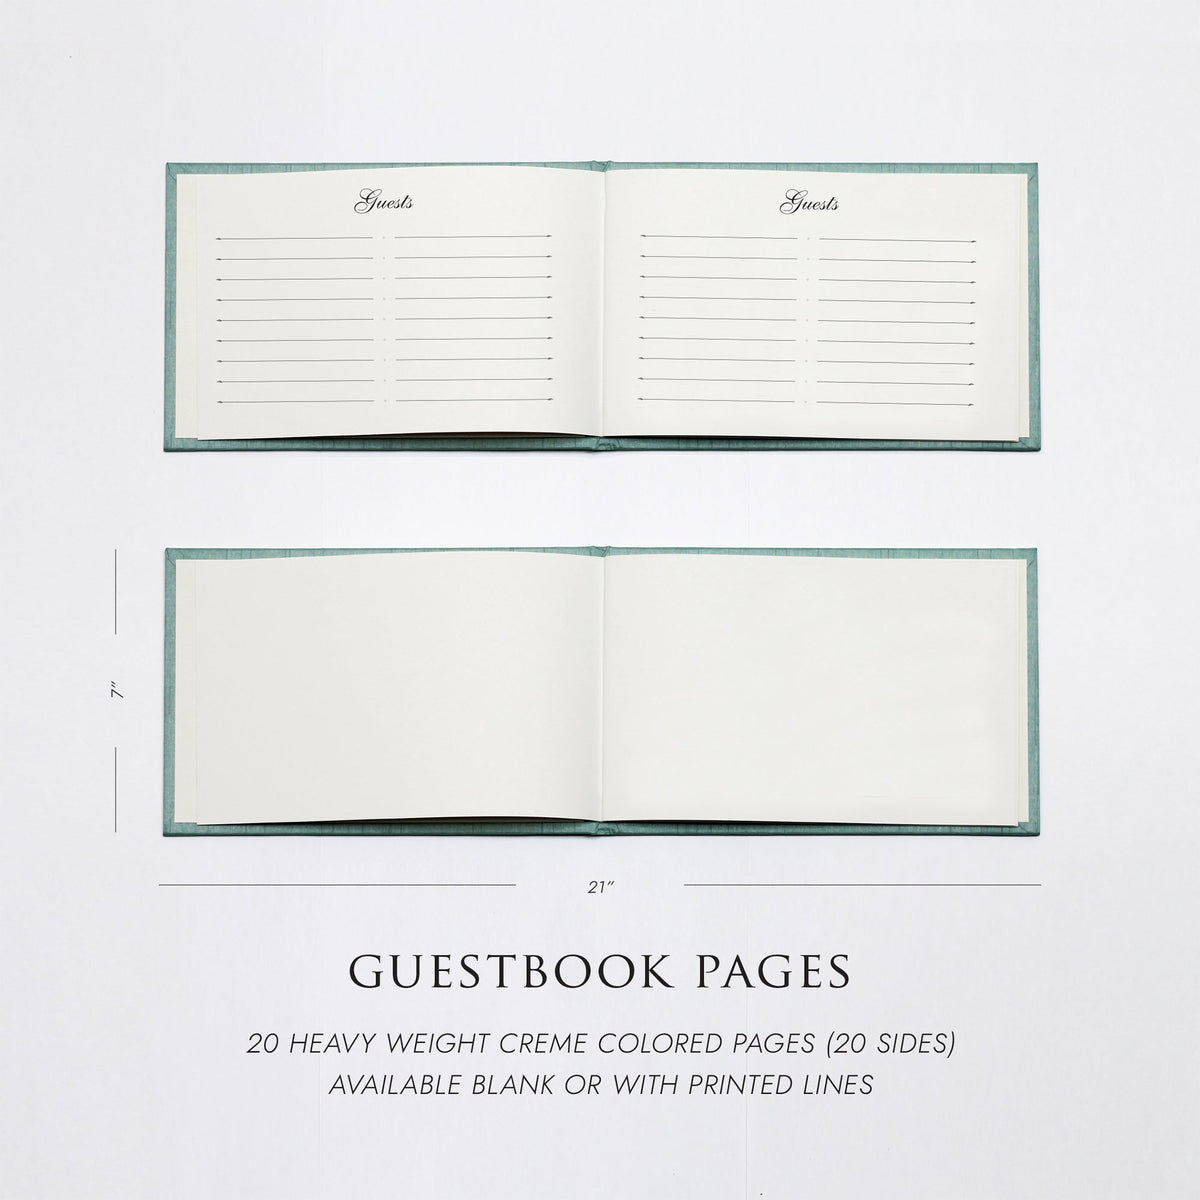 Guestbook Embossed with “Guests” | Cover: Pearl Vegan Leather | Available Personalized